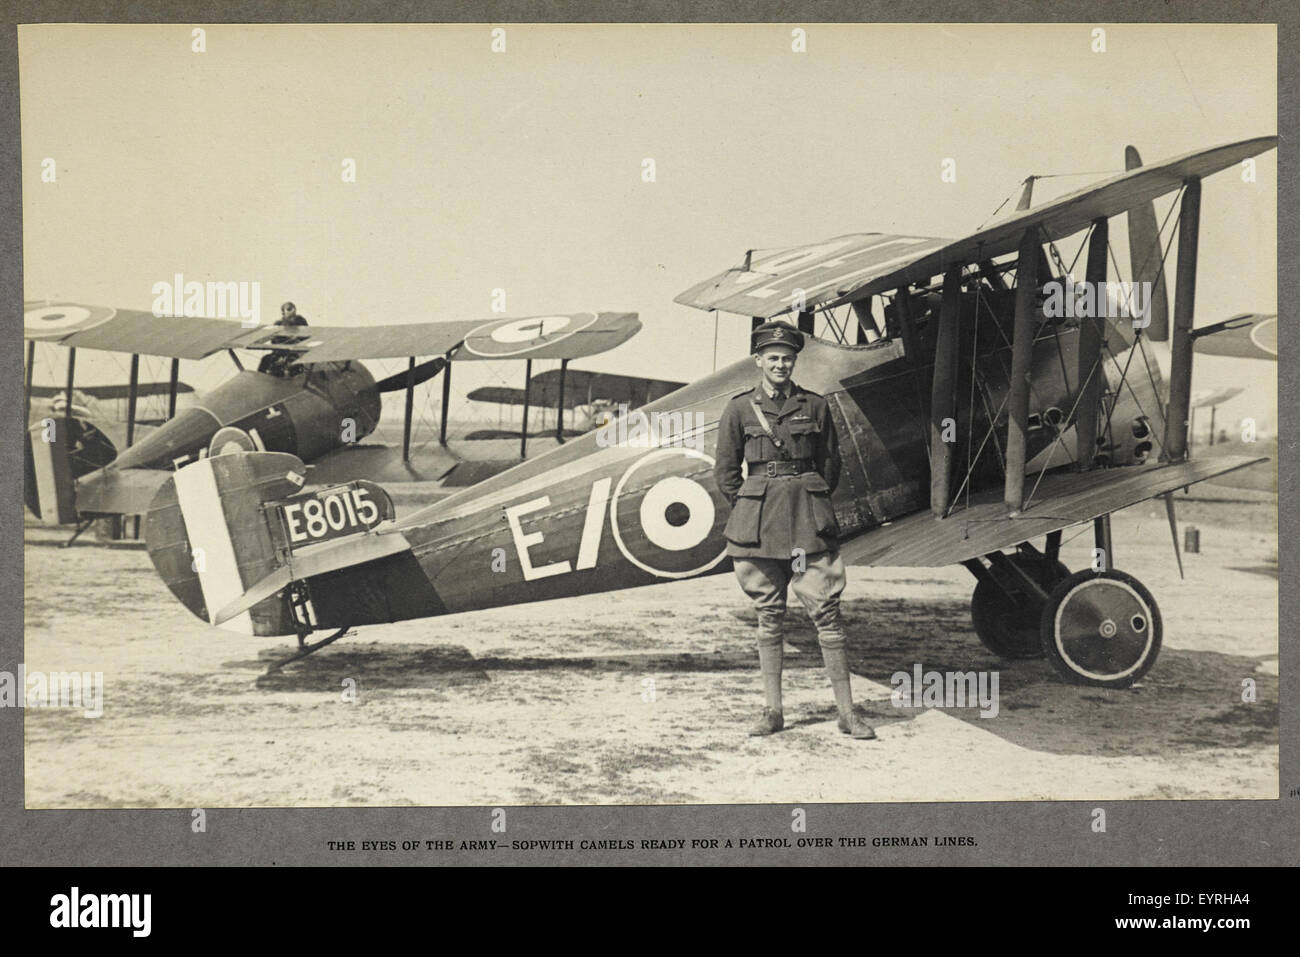 'India Office Official Record of the Great War'. - caption: 'The eyes of the army - Sopwith Camels ready for a patrol over the German lines. View of aircraft and pilot. 1915.' 'India Office Official Record of the Great War' - caption Stock Photo